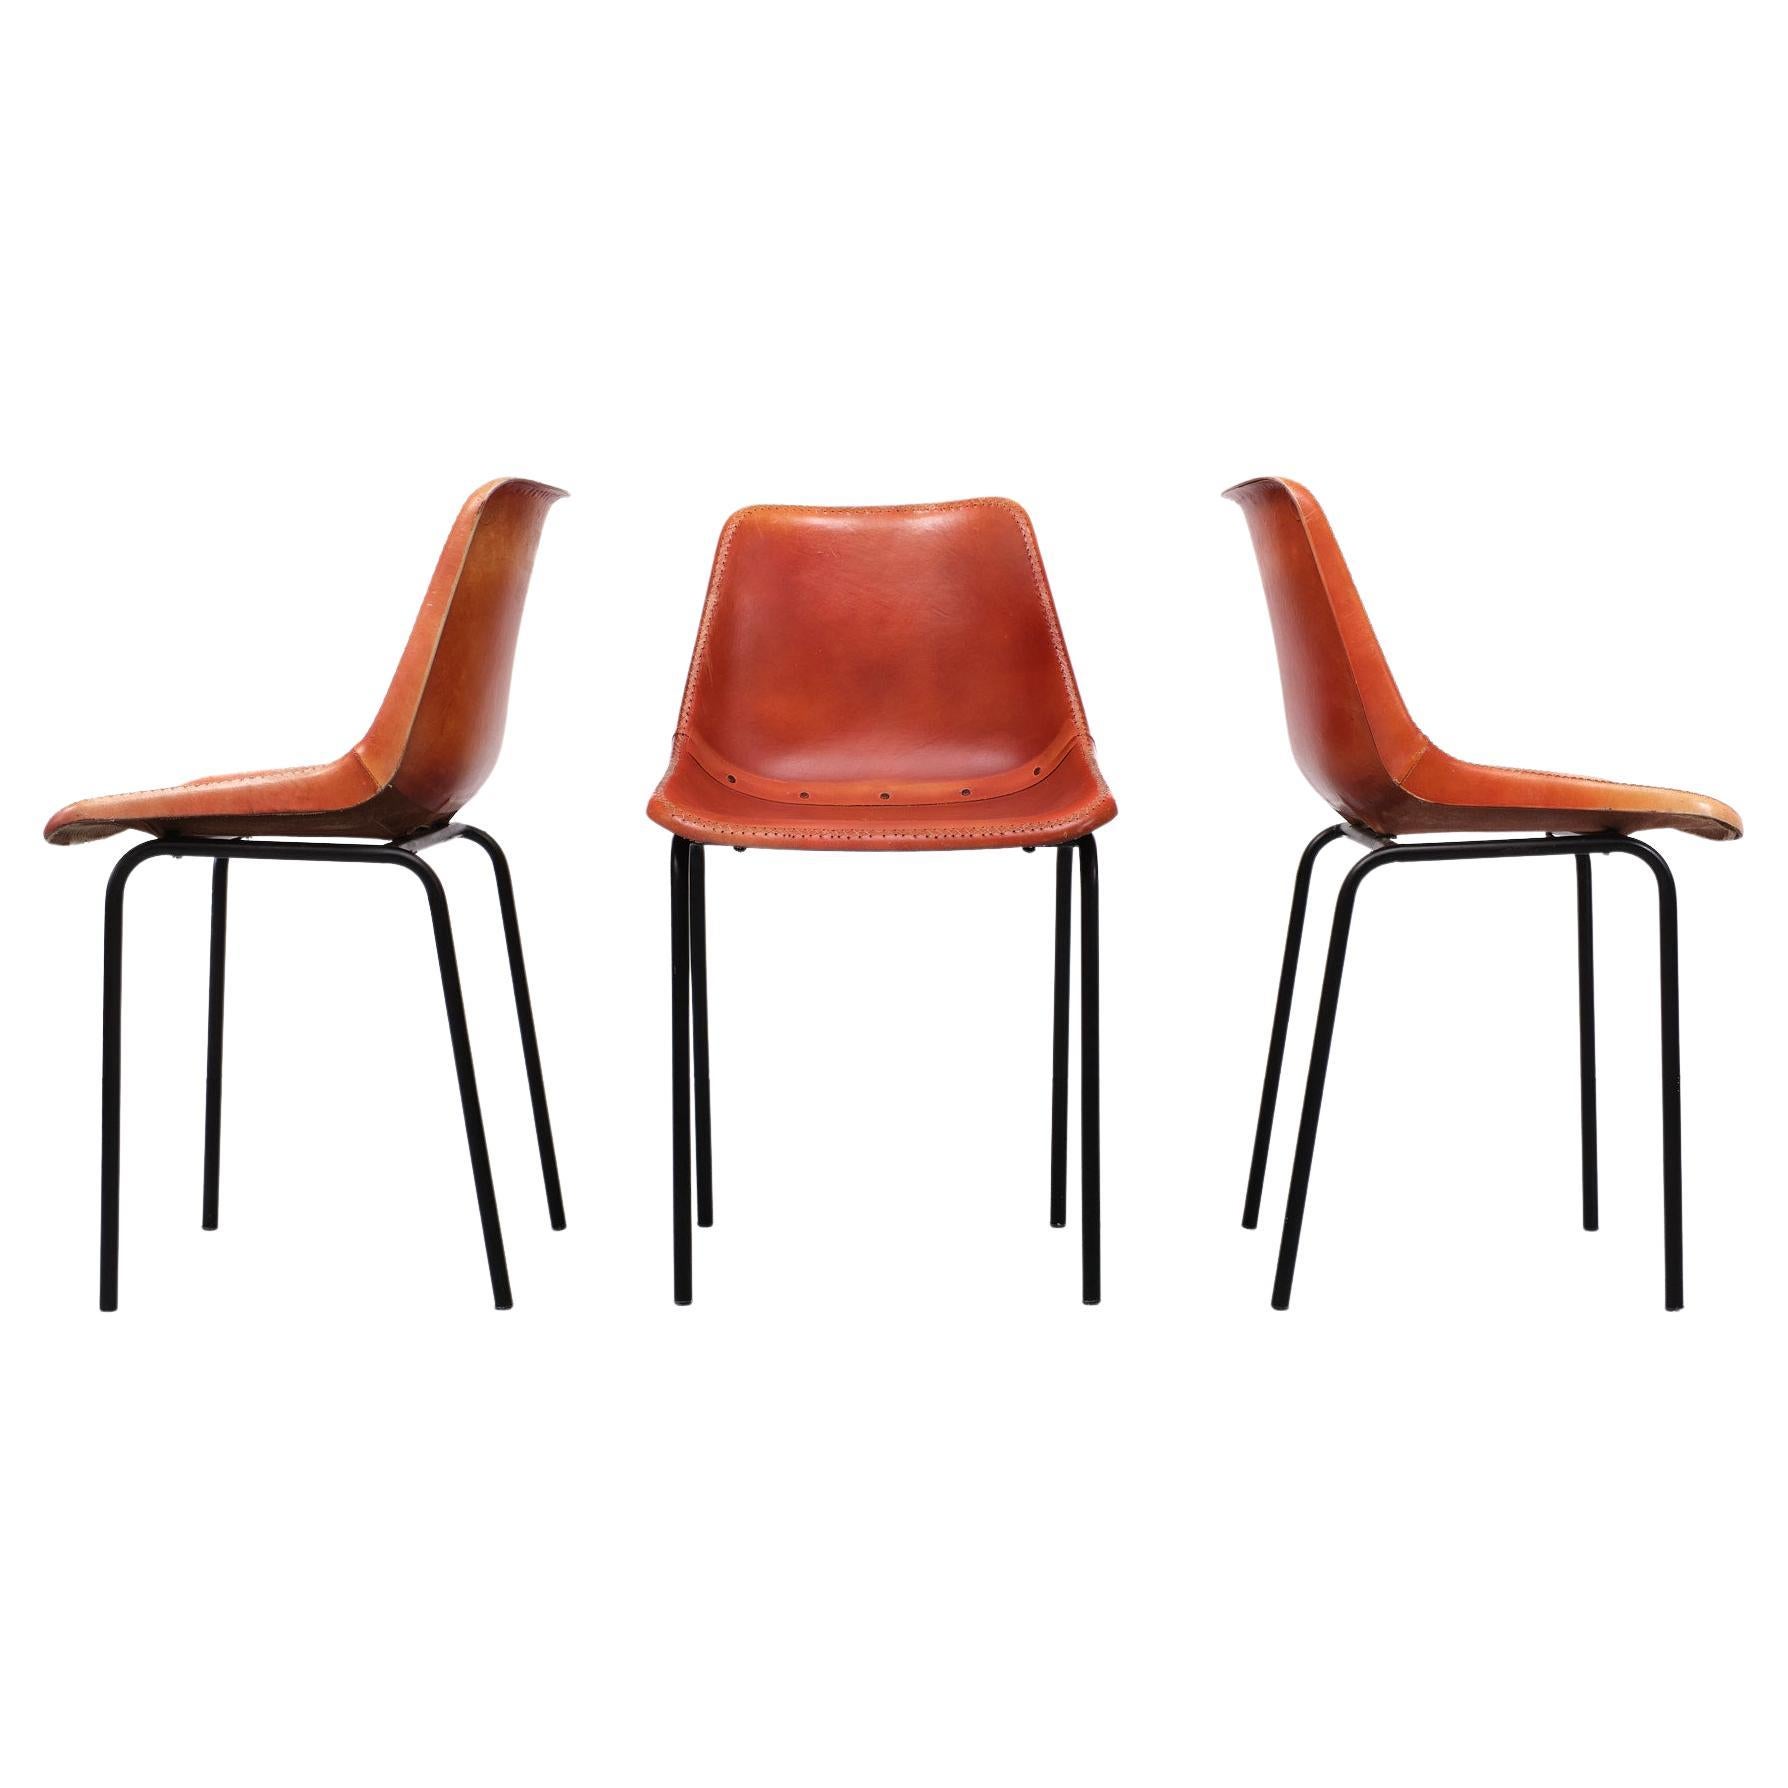 Kare Design stich leather chairs Germany  For Sale